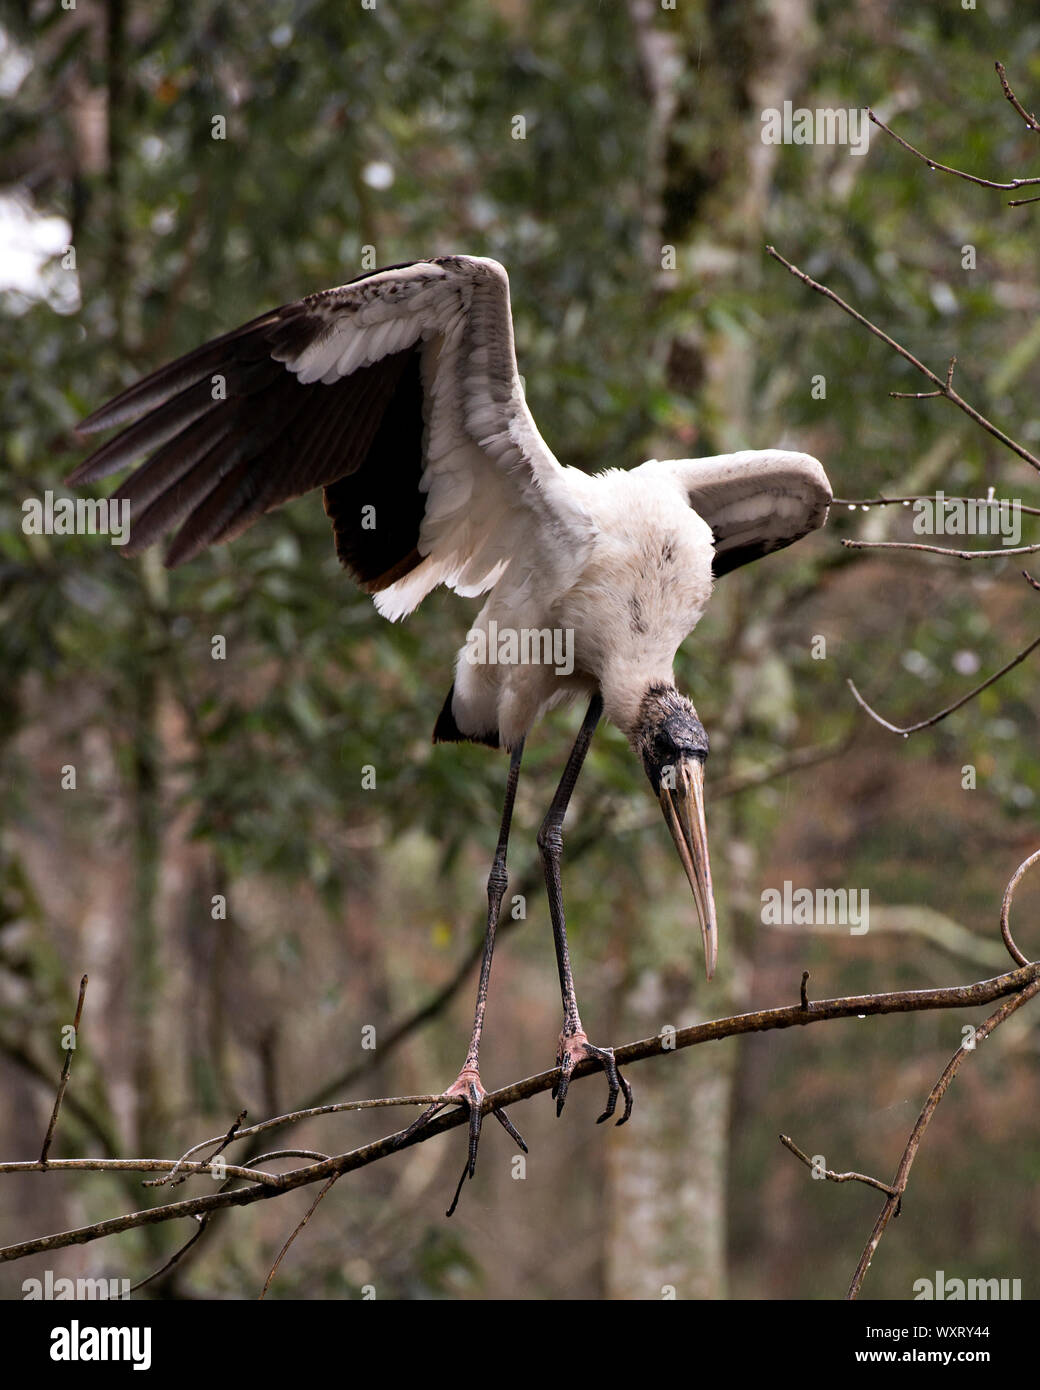 Wood Stork bird perch on a branch with its spread wings in its surrounding and environment. Stock Photo